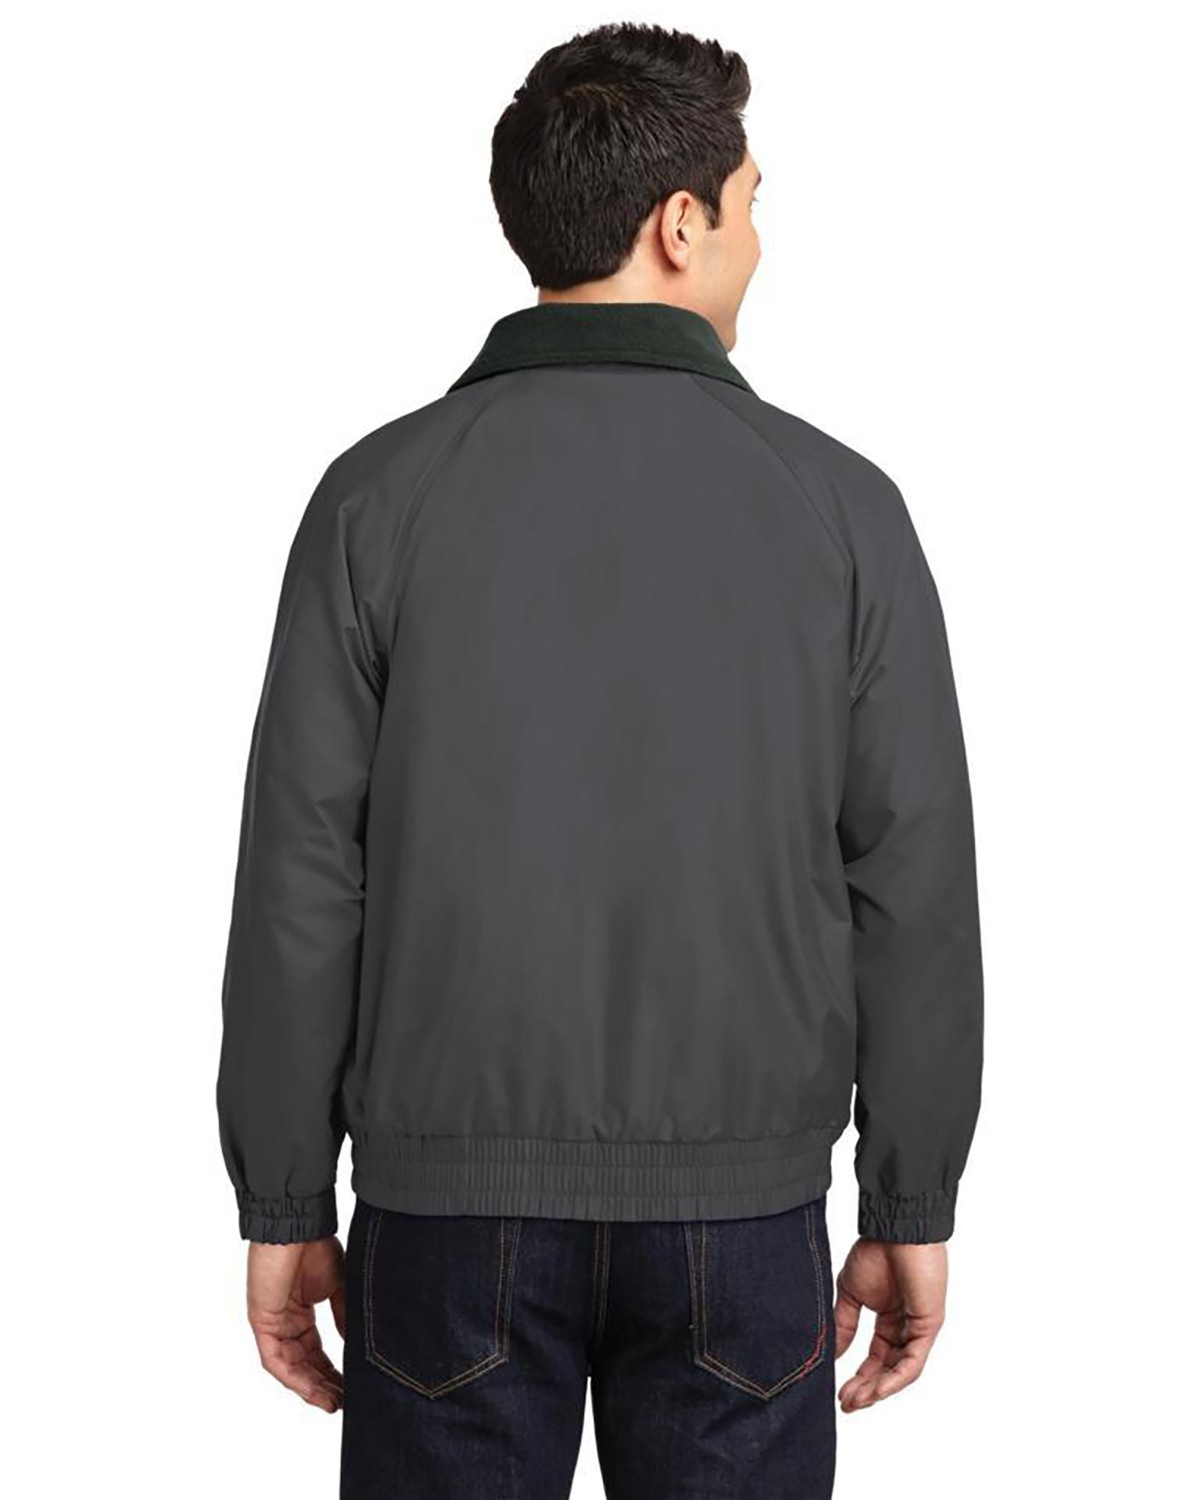 'Port Authority JP54 Competitor Jacket'